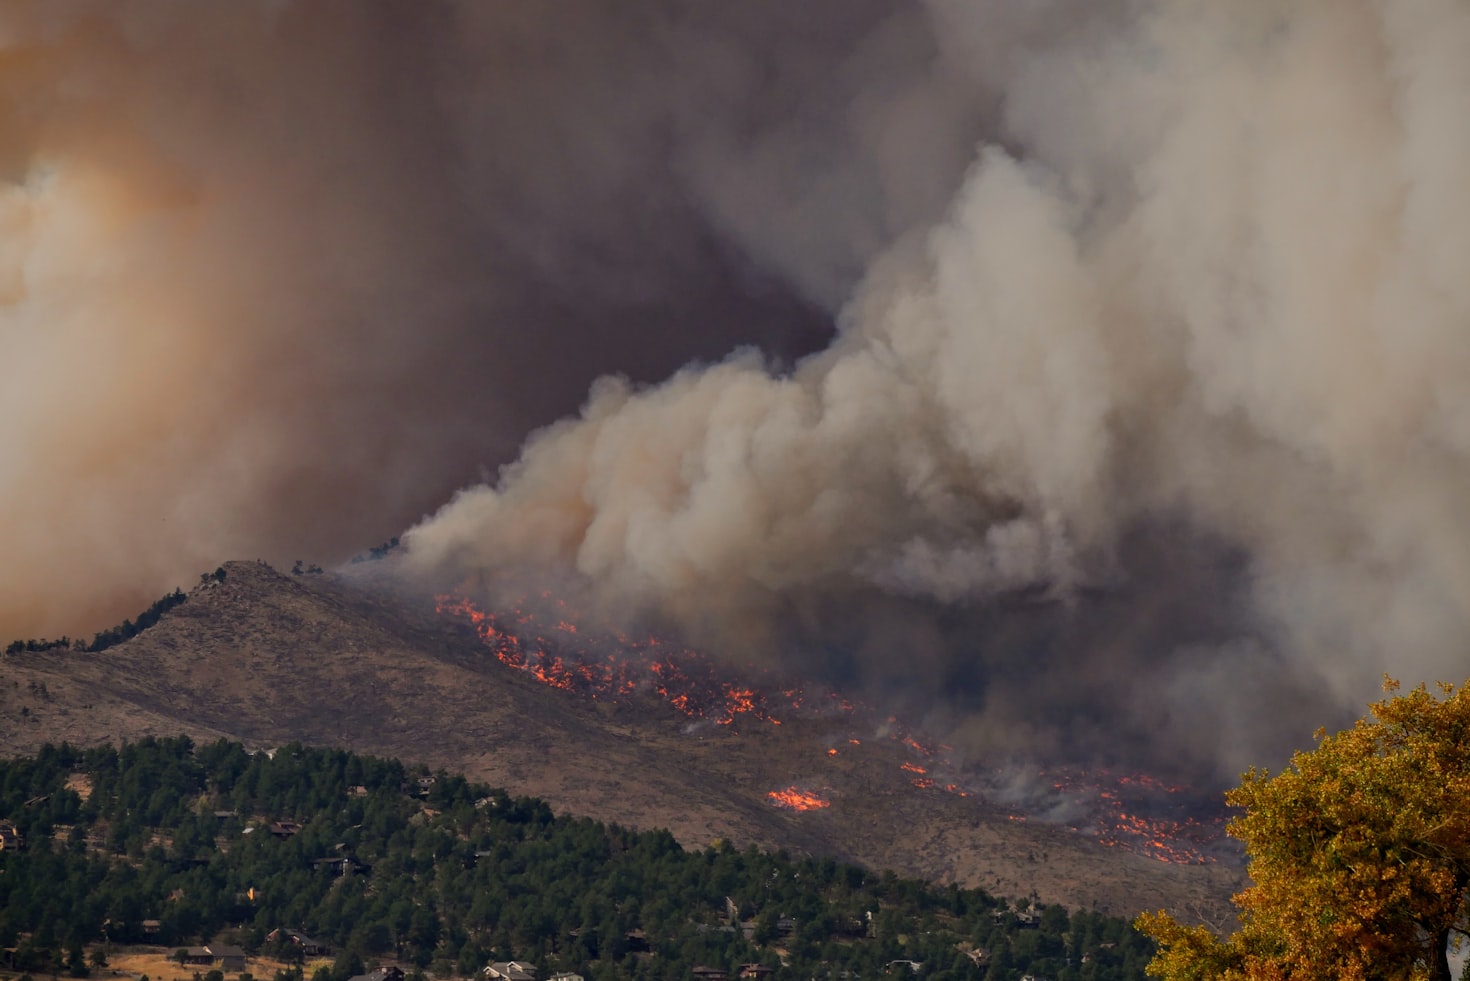 Harnessing micro SaaS to tackle wildfires